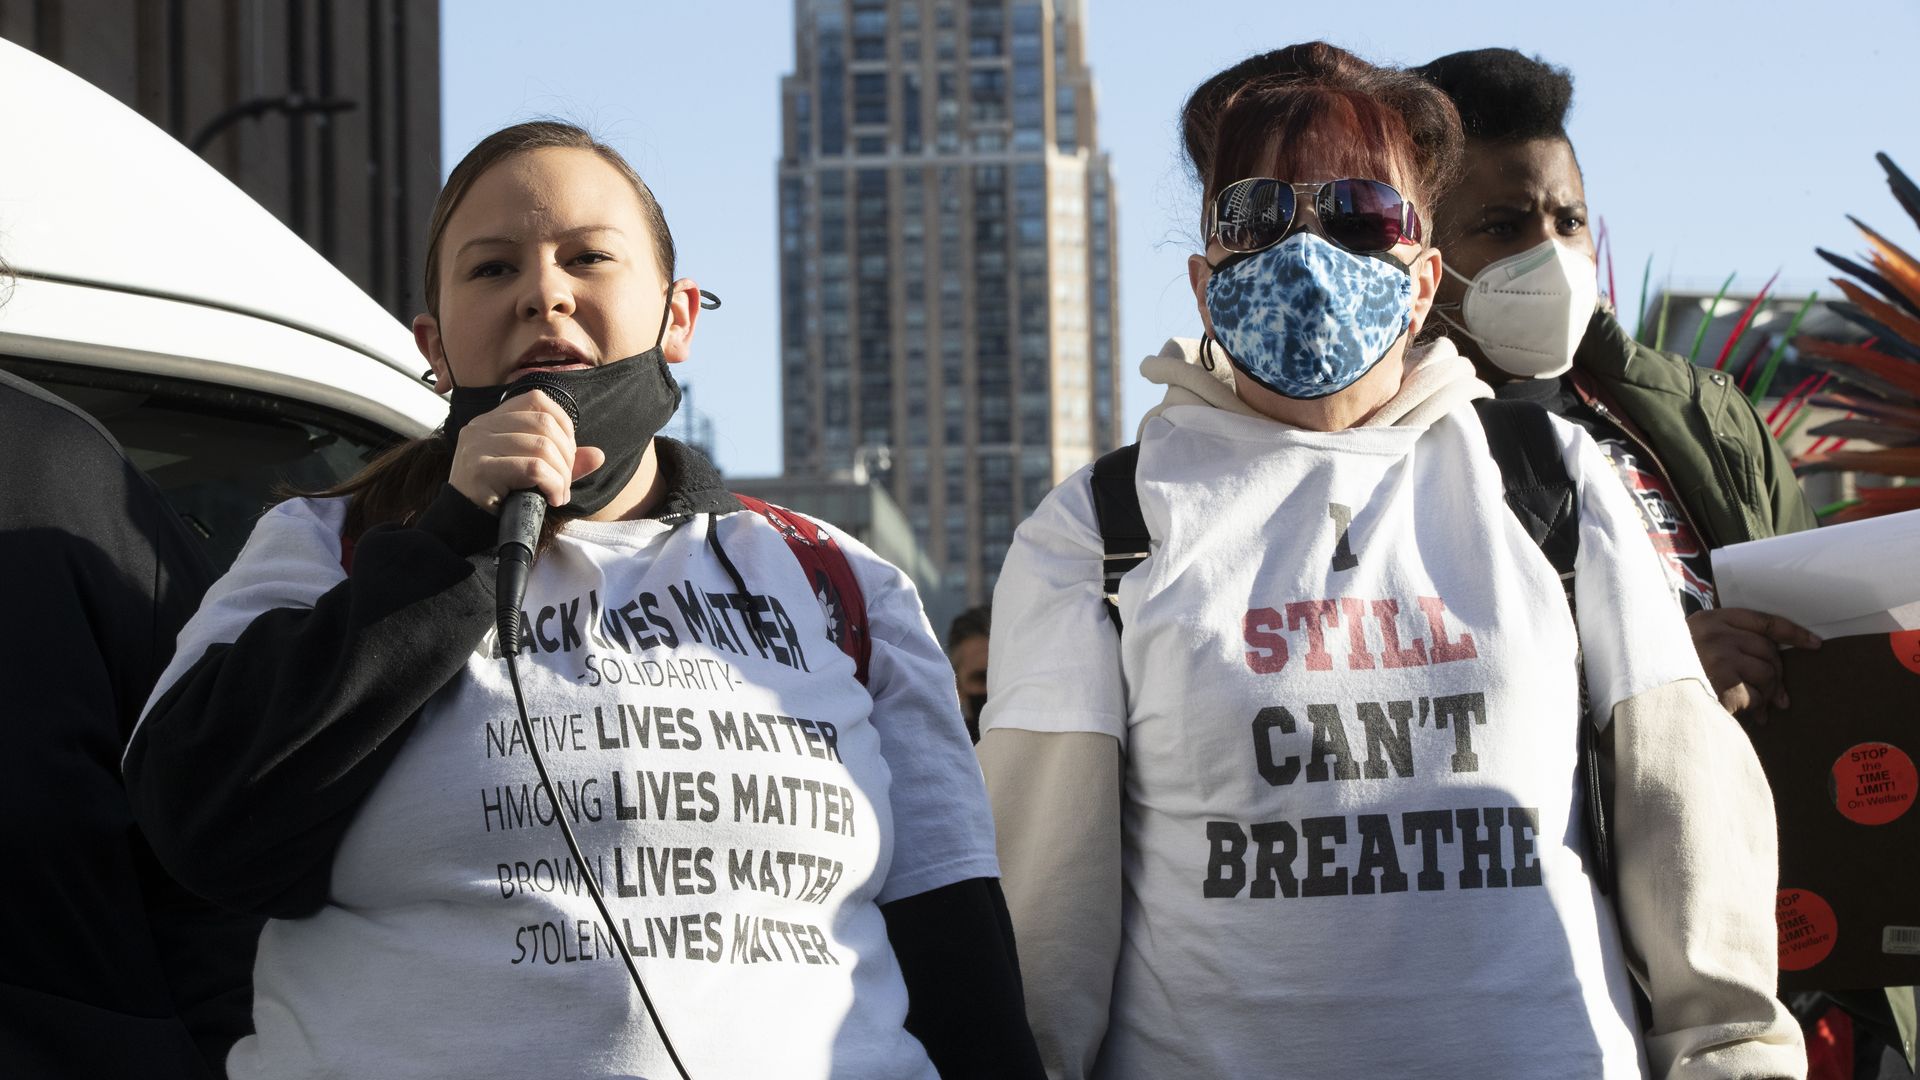  Native American activists speak during a Black Lives Matter protest in memory of George Floyd in Minneapolis.